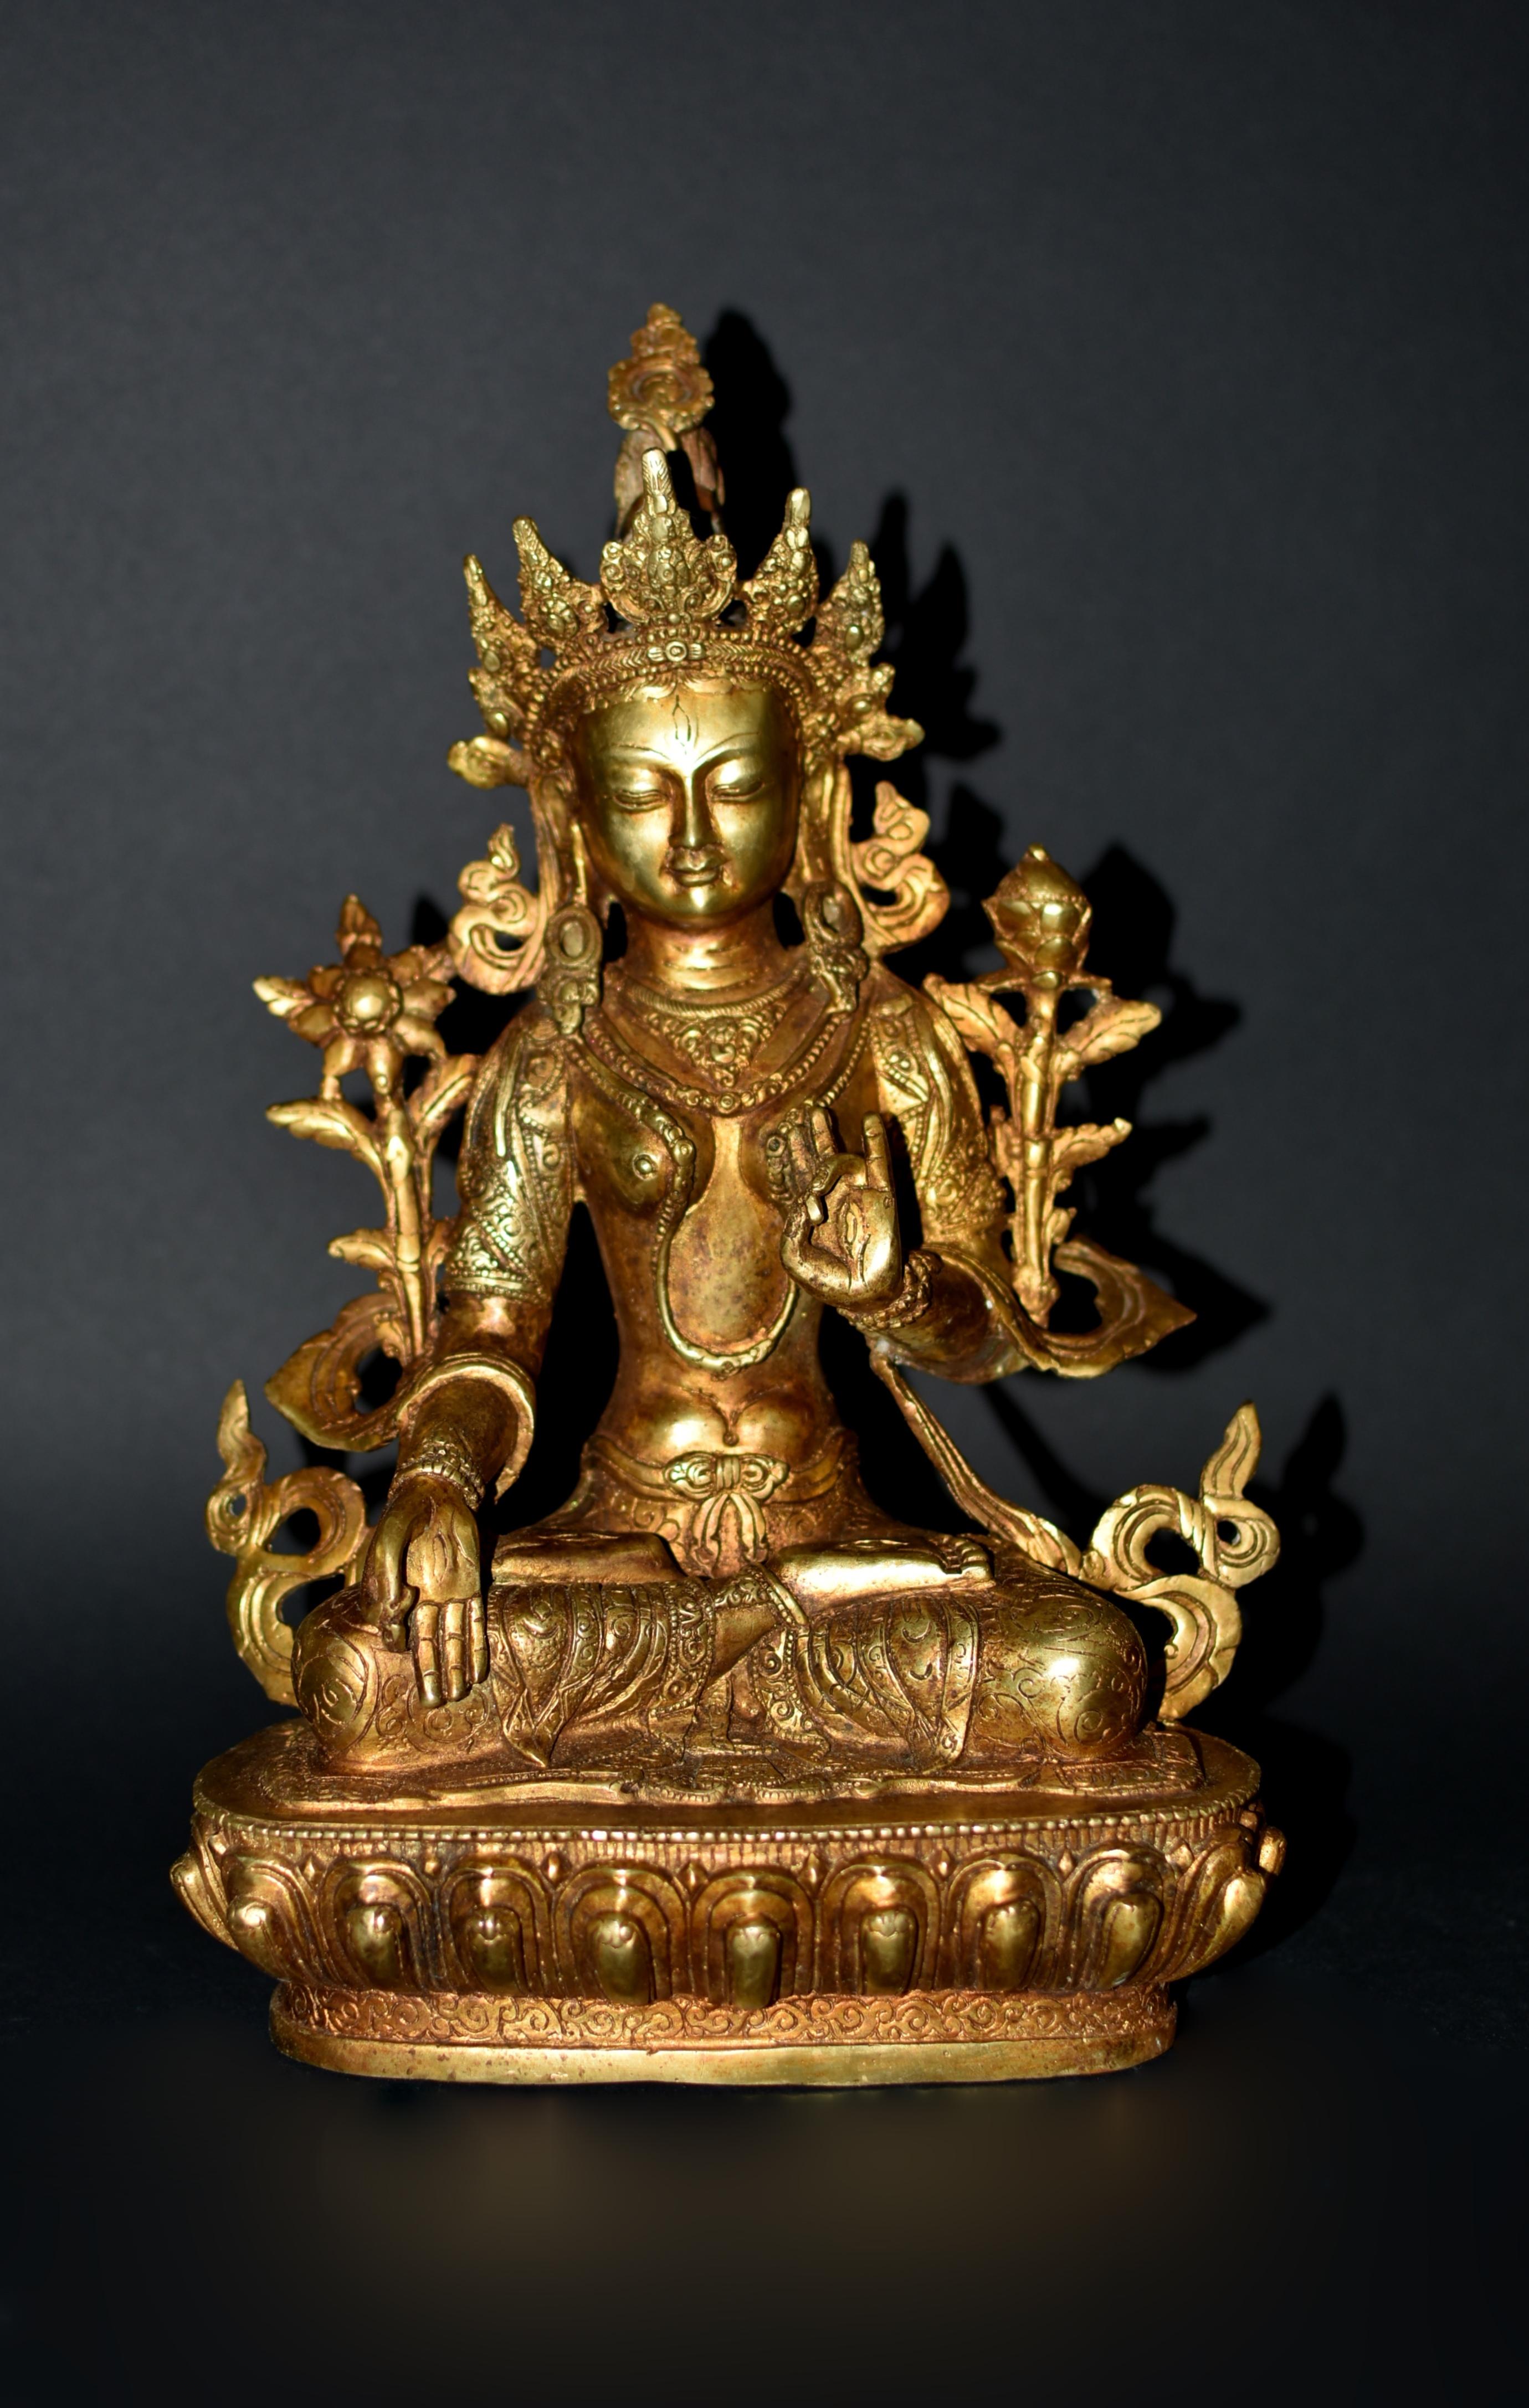 A beautiful gilt bronze White Tara statue. The serene face with large downcast eyes under arched eyebrows above pursed lips, flanked by long earlobes, all under hair neatly tied and adorned with an elaborate crown. Extra eyes between the brows, on